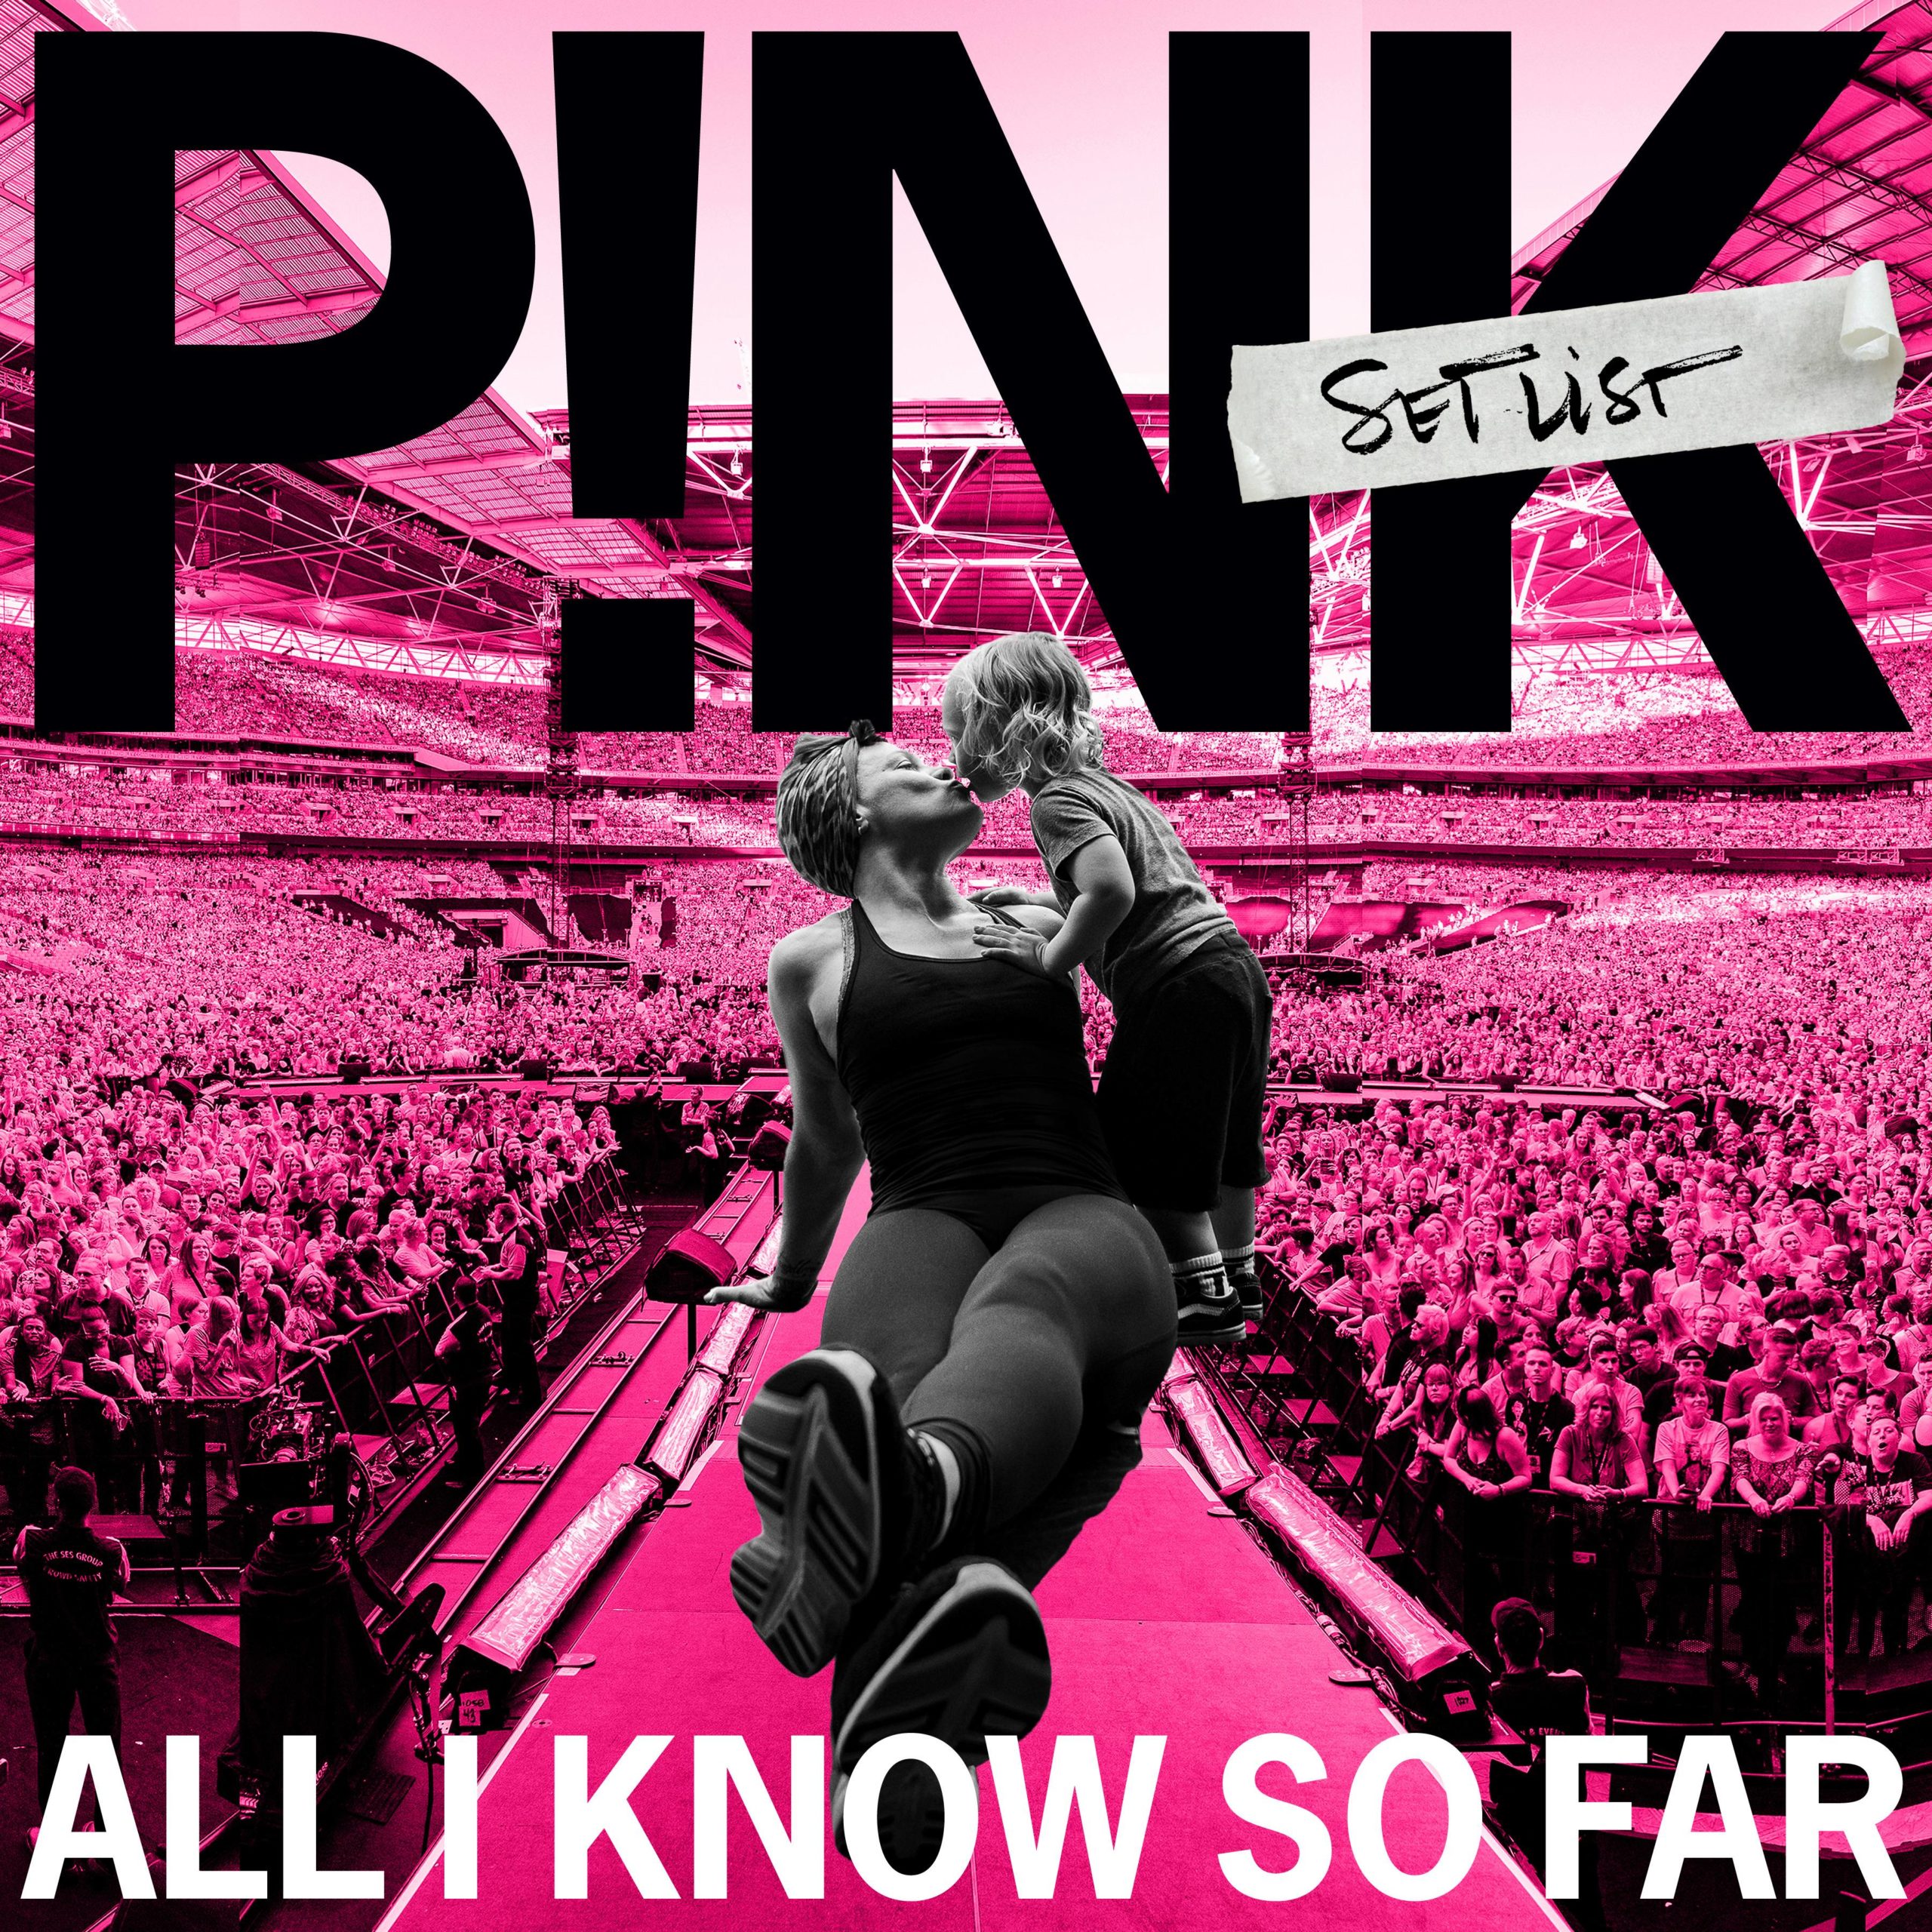 Pop Songstress P!NK Releases ‘All I Know So Far Setlist’ Album Icon